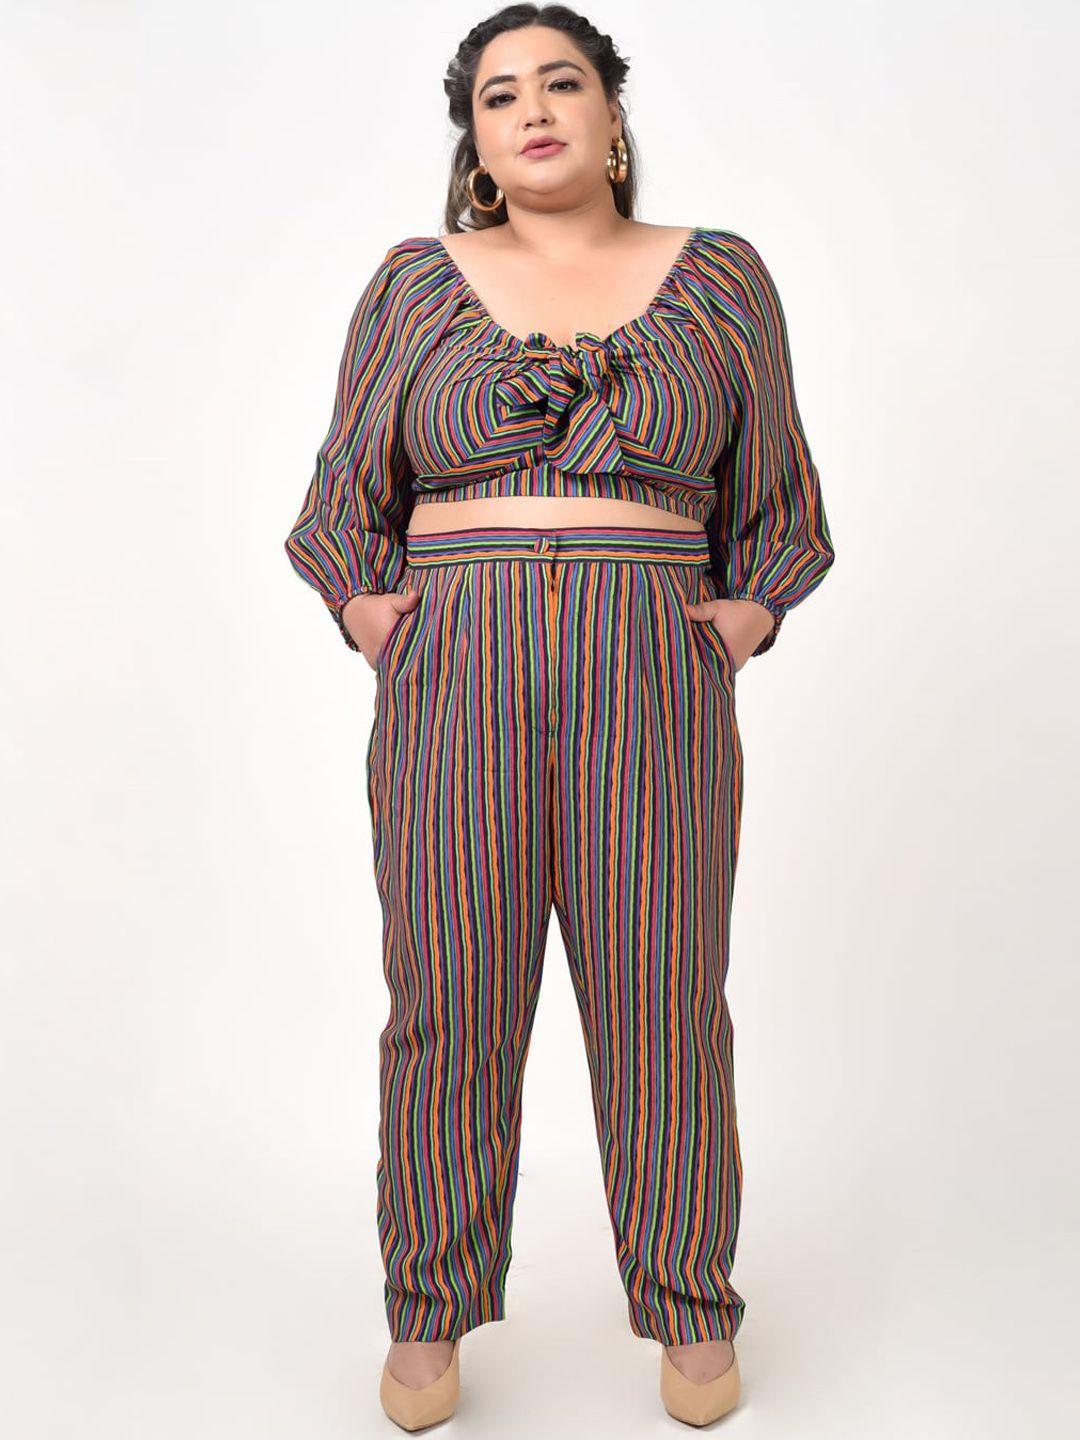 hencemade plus size women red & green striped co-ords